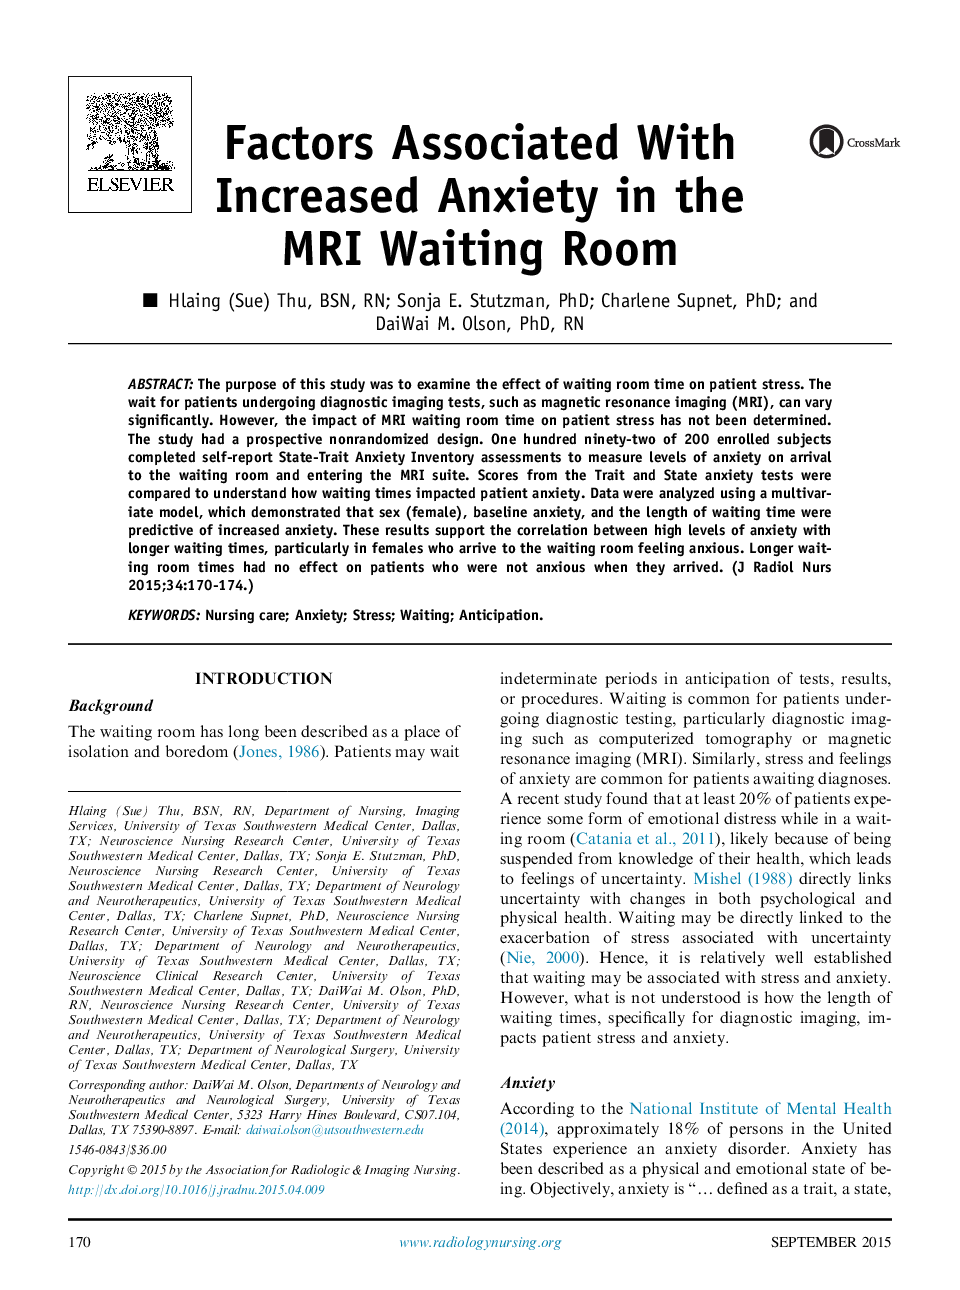 Factors Associated With Increased Anxiety in the MRI Waiting Room